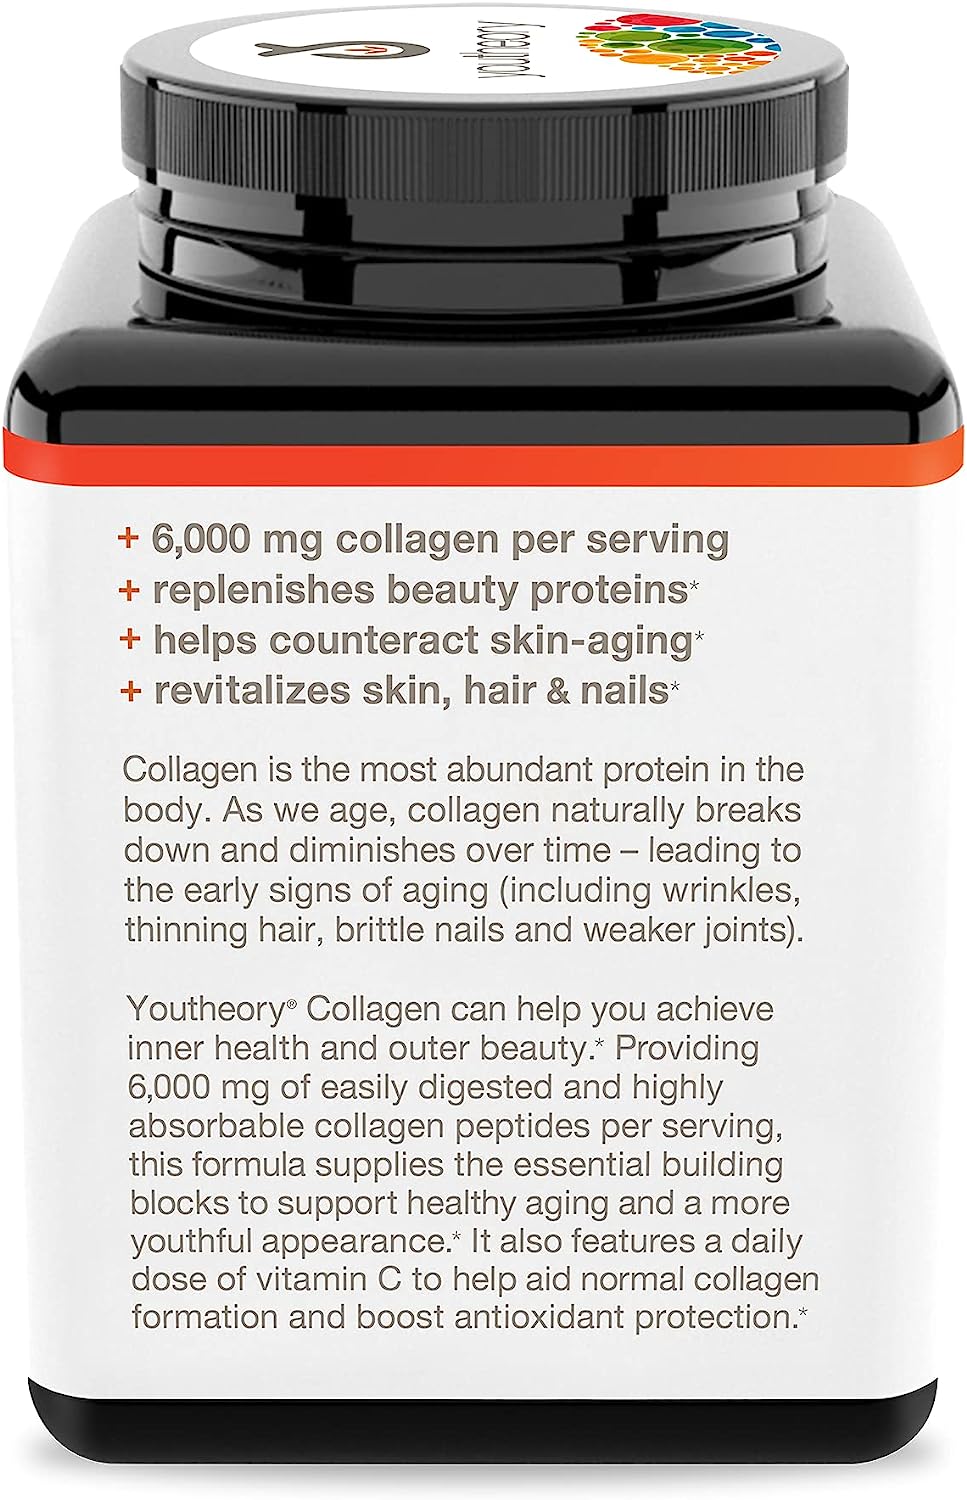 Youtheory Collagen with Vitamin C, Advanced Hydrolyzed Formula 290 Supplements